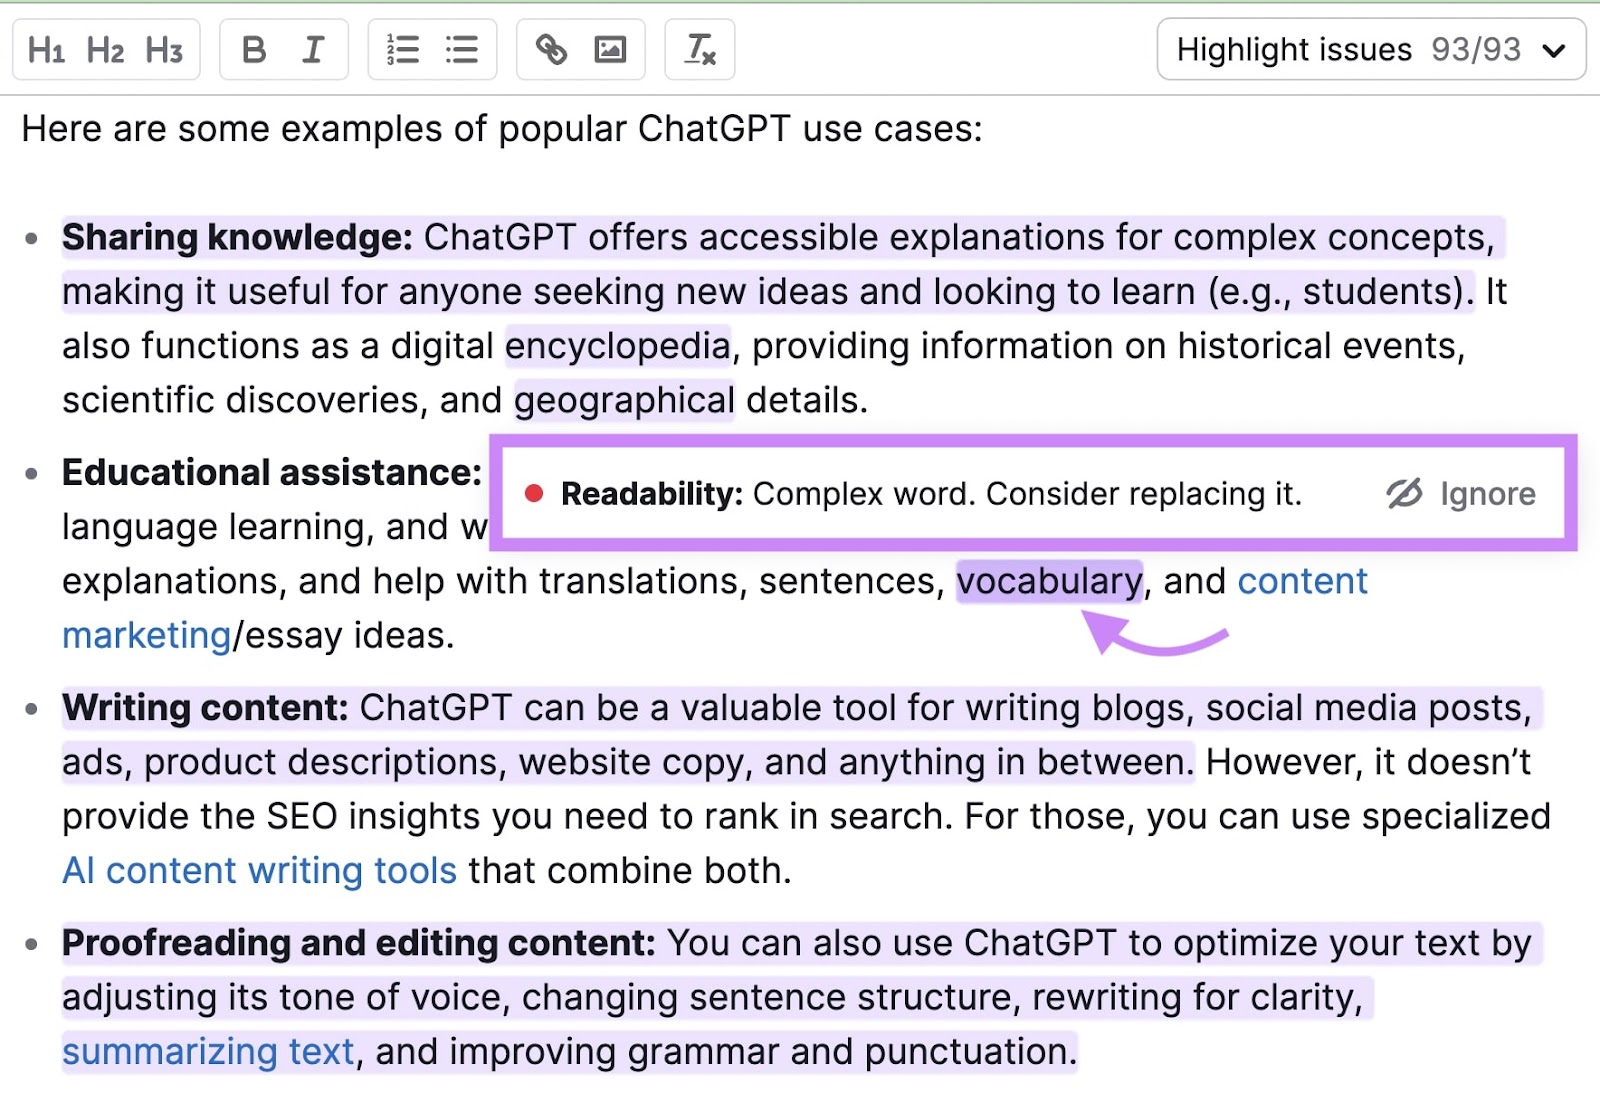 SEO Writing Assistant marks text with readability issues in purple color